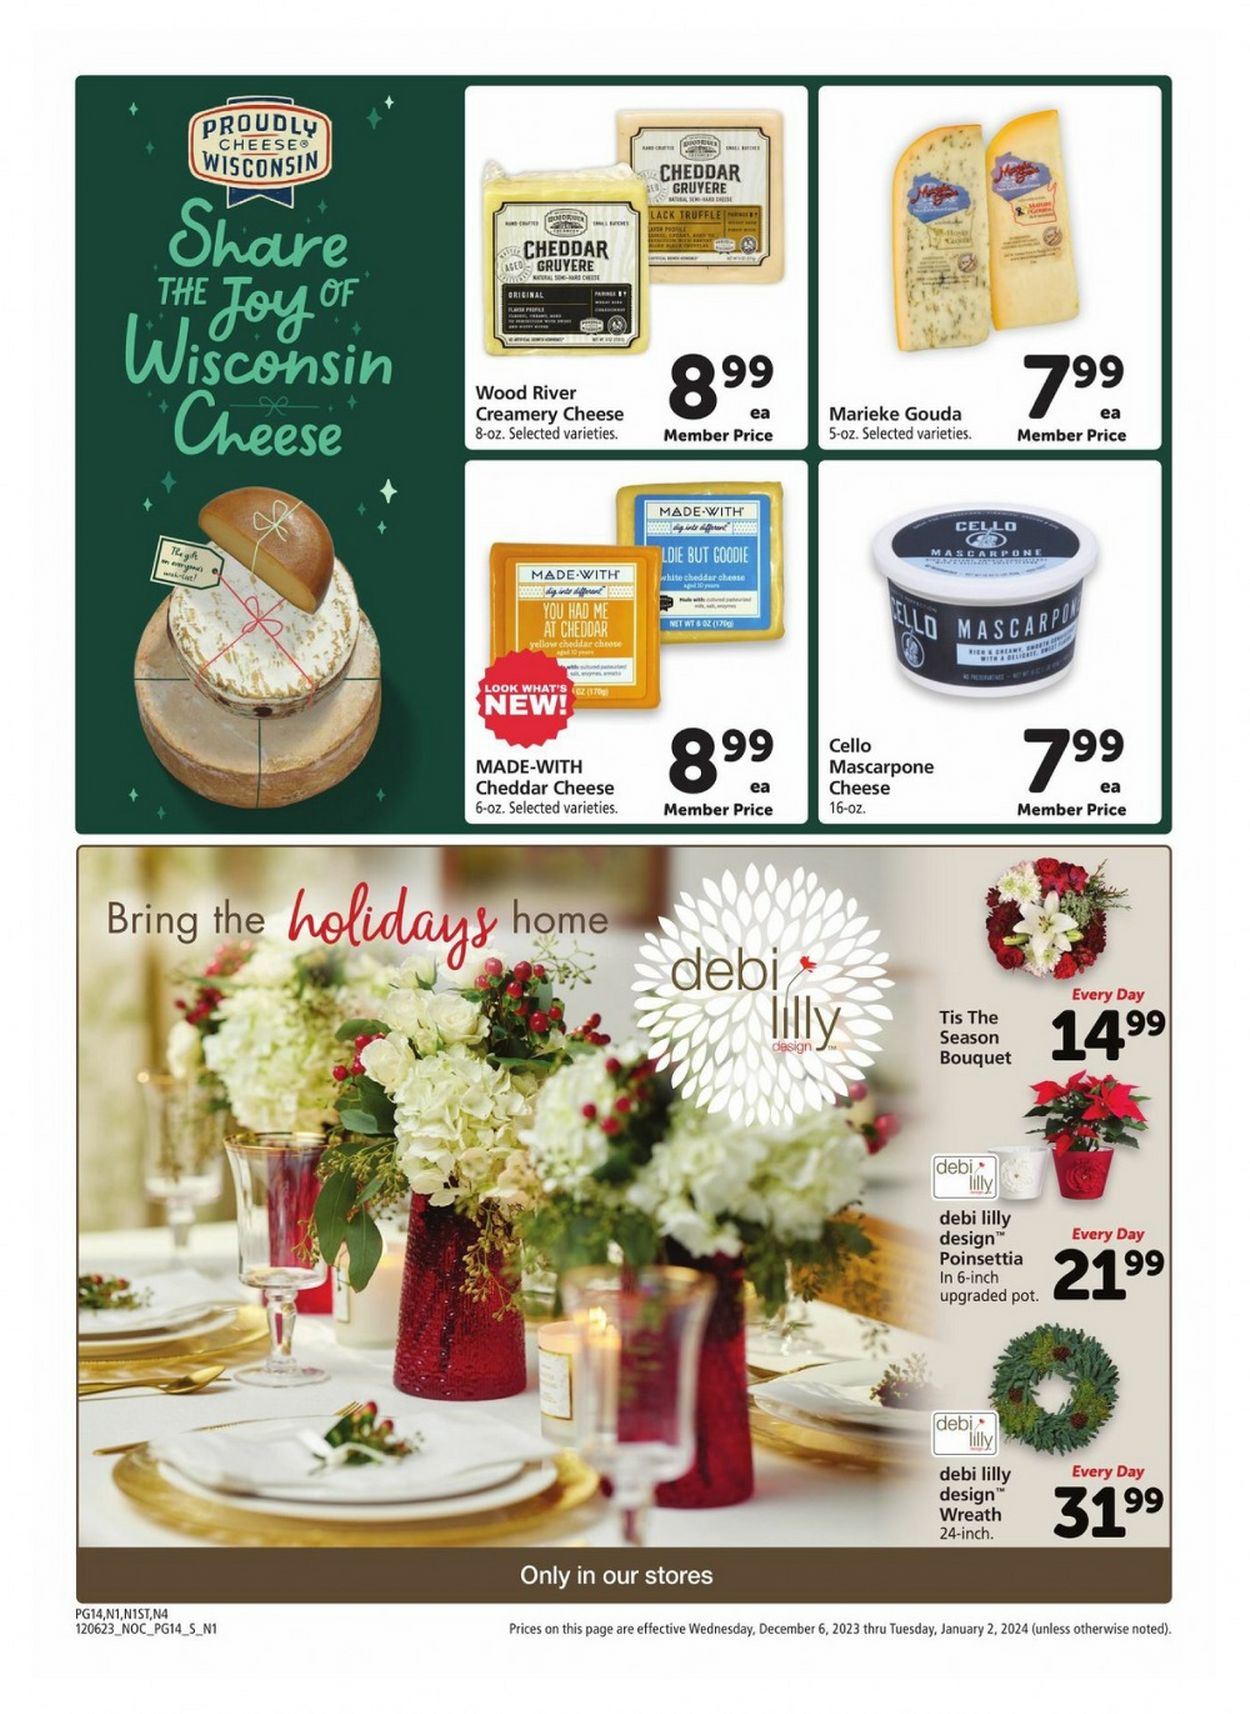 Safeway Christmas July 2024 Weekly Sales, Deals, Discounts and Digital Coupons.